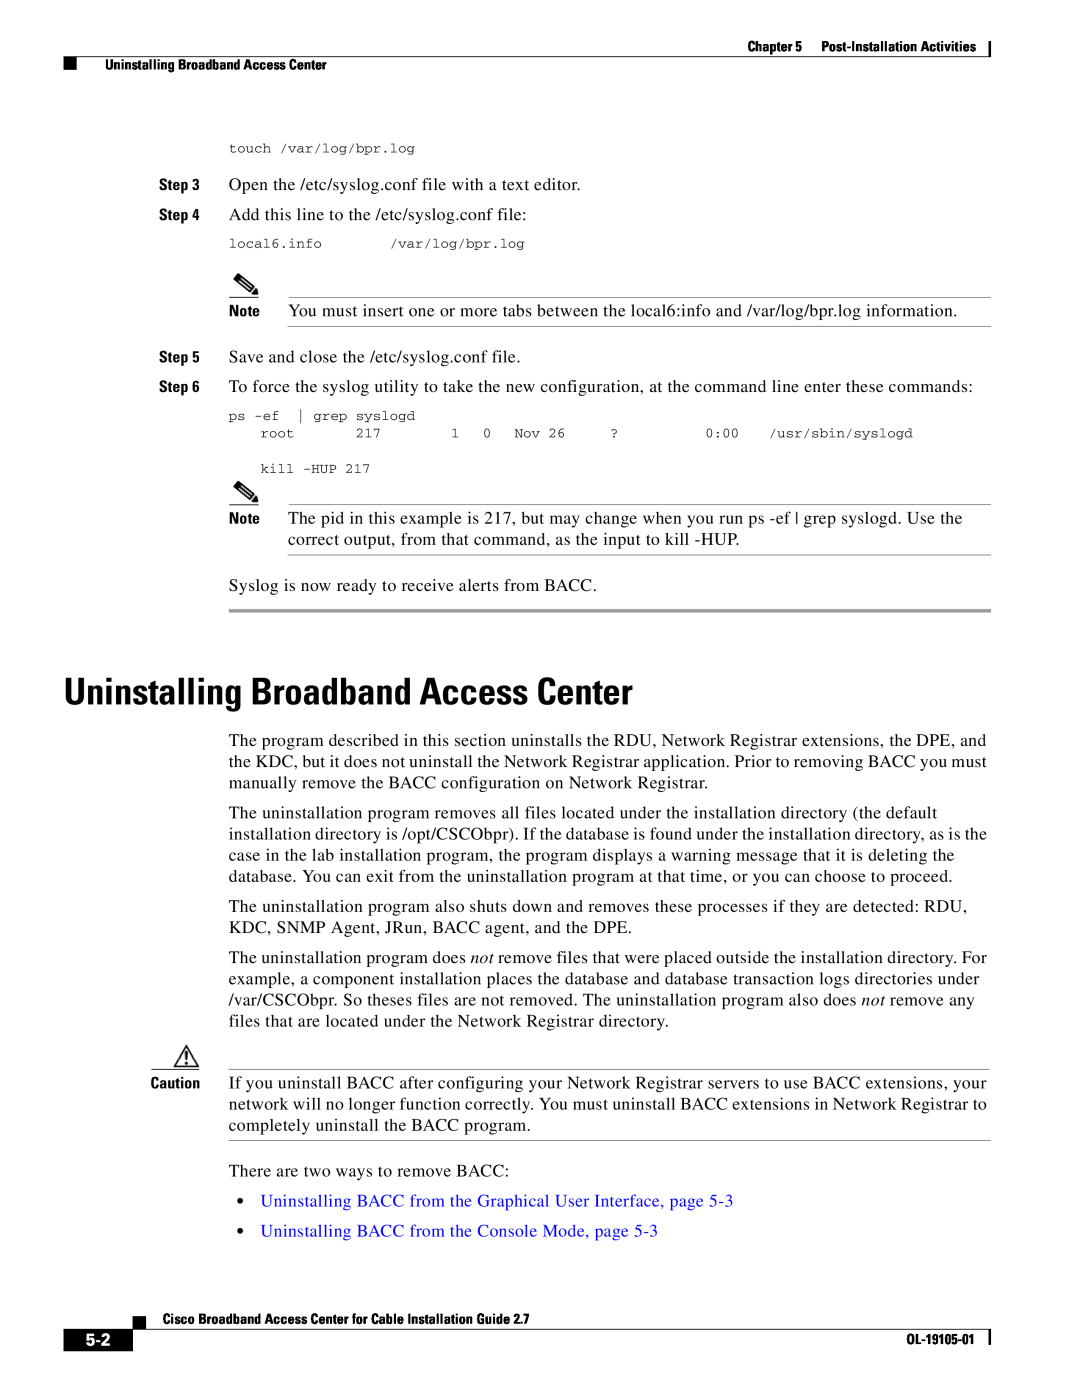 Cisco Systems manual Uninstalling Broadband Access Center, Uninstalling BACC from the Graphical User Interface, page 